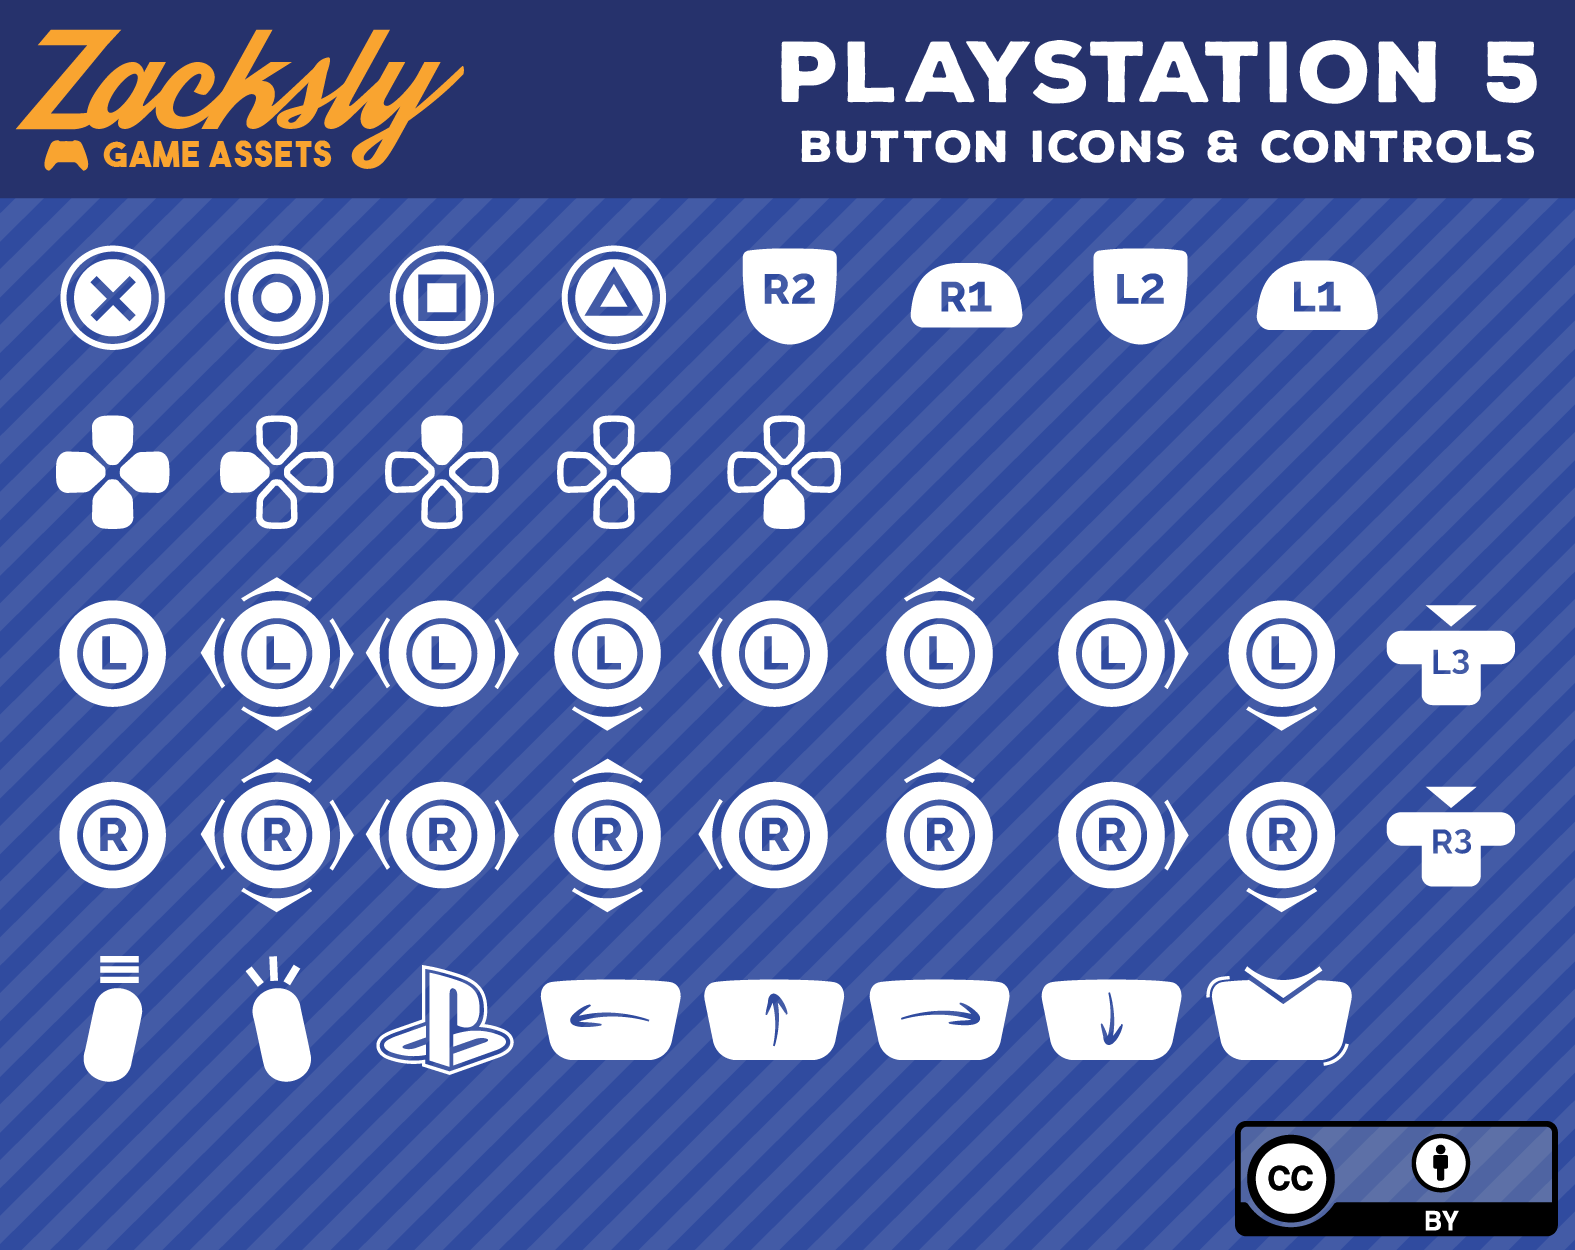 Playstation Button Tattoo Ideas - wide 8